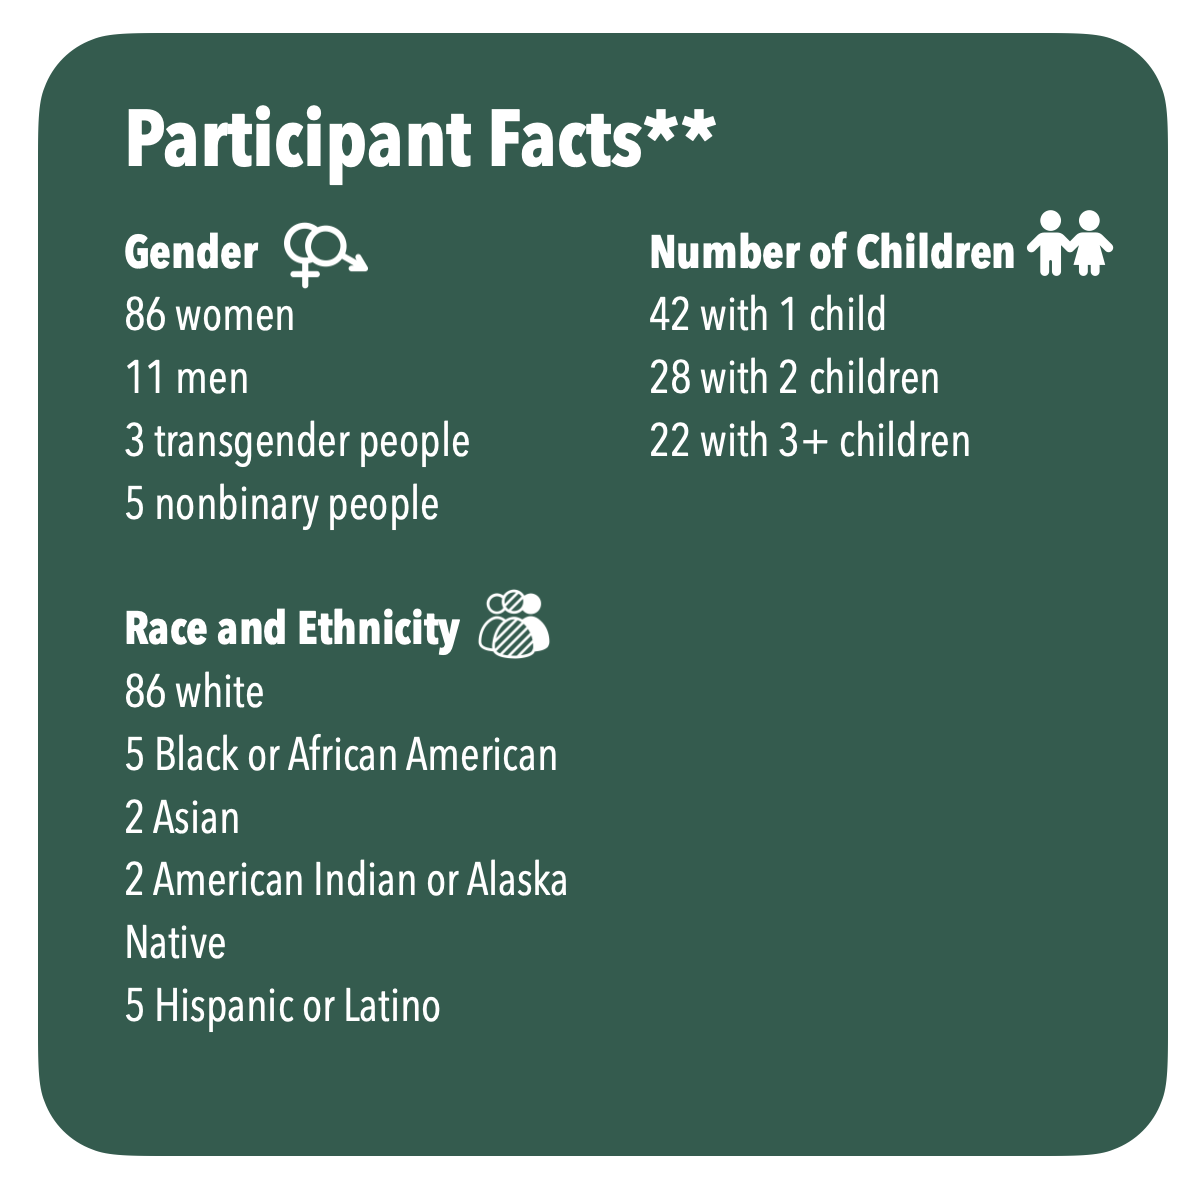 Participant Facts: Gender: 86 women, 11 men, 3 transgender people, 5 nonbinary people. Race and Ethnicity: 86 white, 5 Black, 2 Asian, 2 Native American/Alaska Native, 5 Hispanic/Latino. Number of Children: 42 with 1, 28 with 2, 22 with 3+.